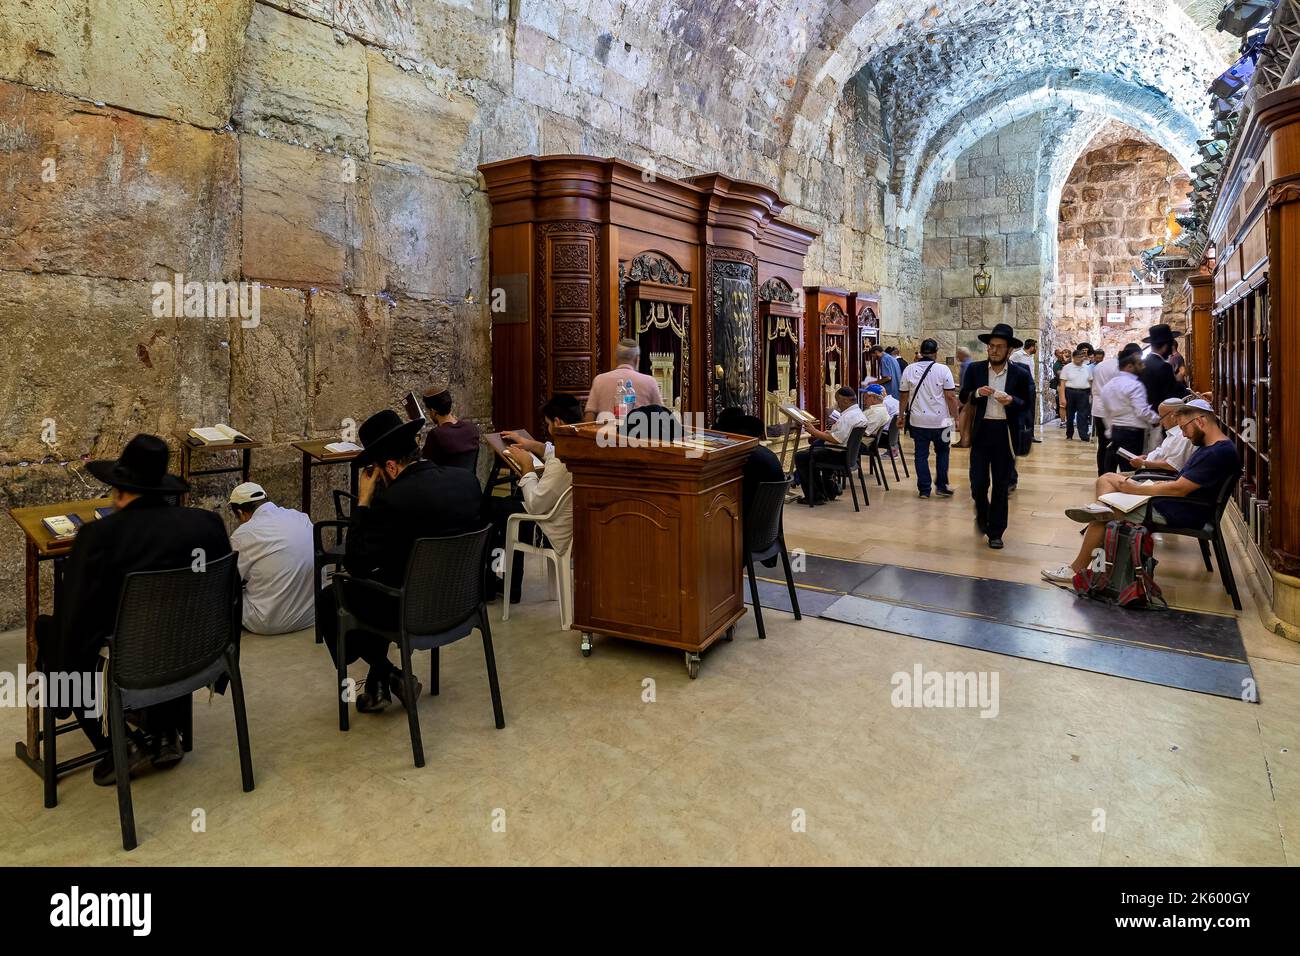 Prayers inside of the Cave Synagogue - interior covered part of the Western Wall (aka Wailing Wall) in Jerusalem, Israel. Stock Photo